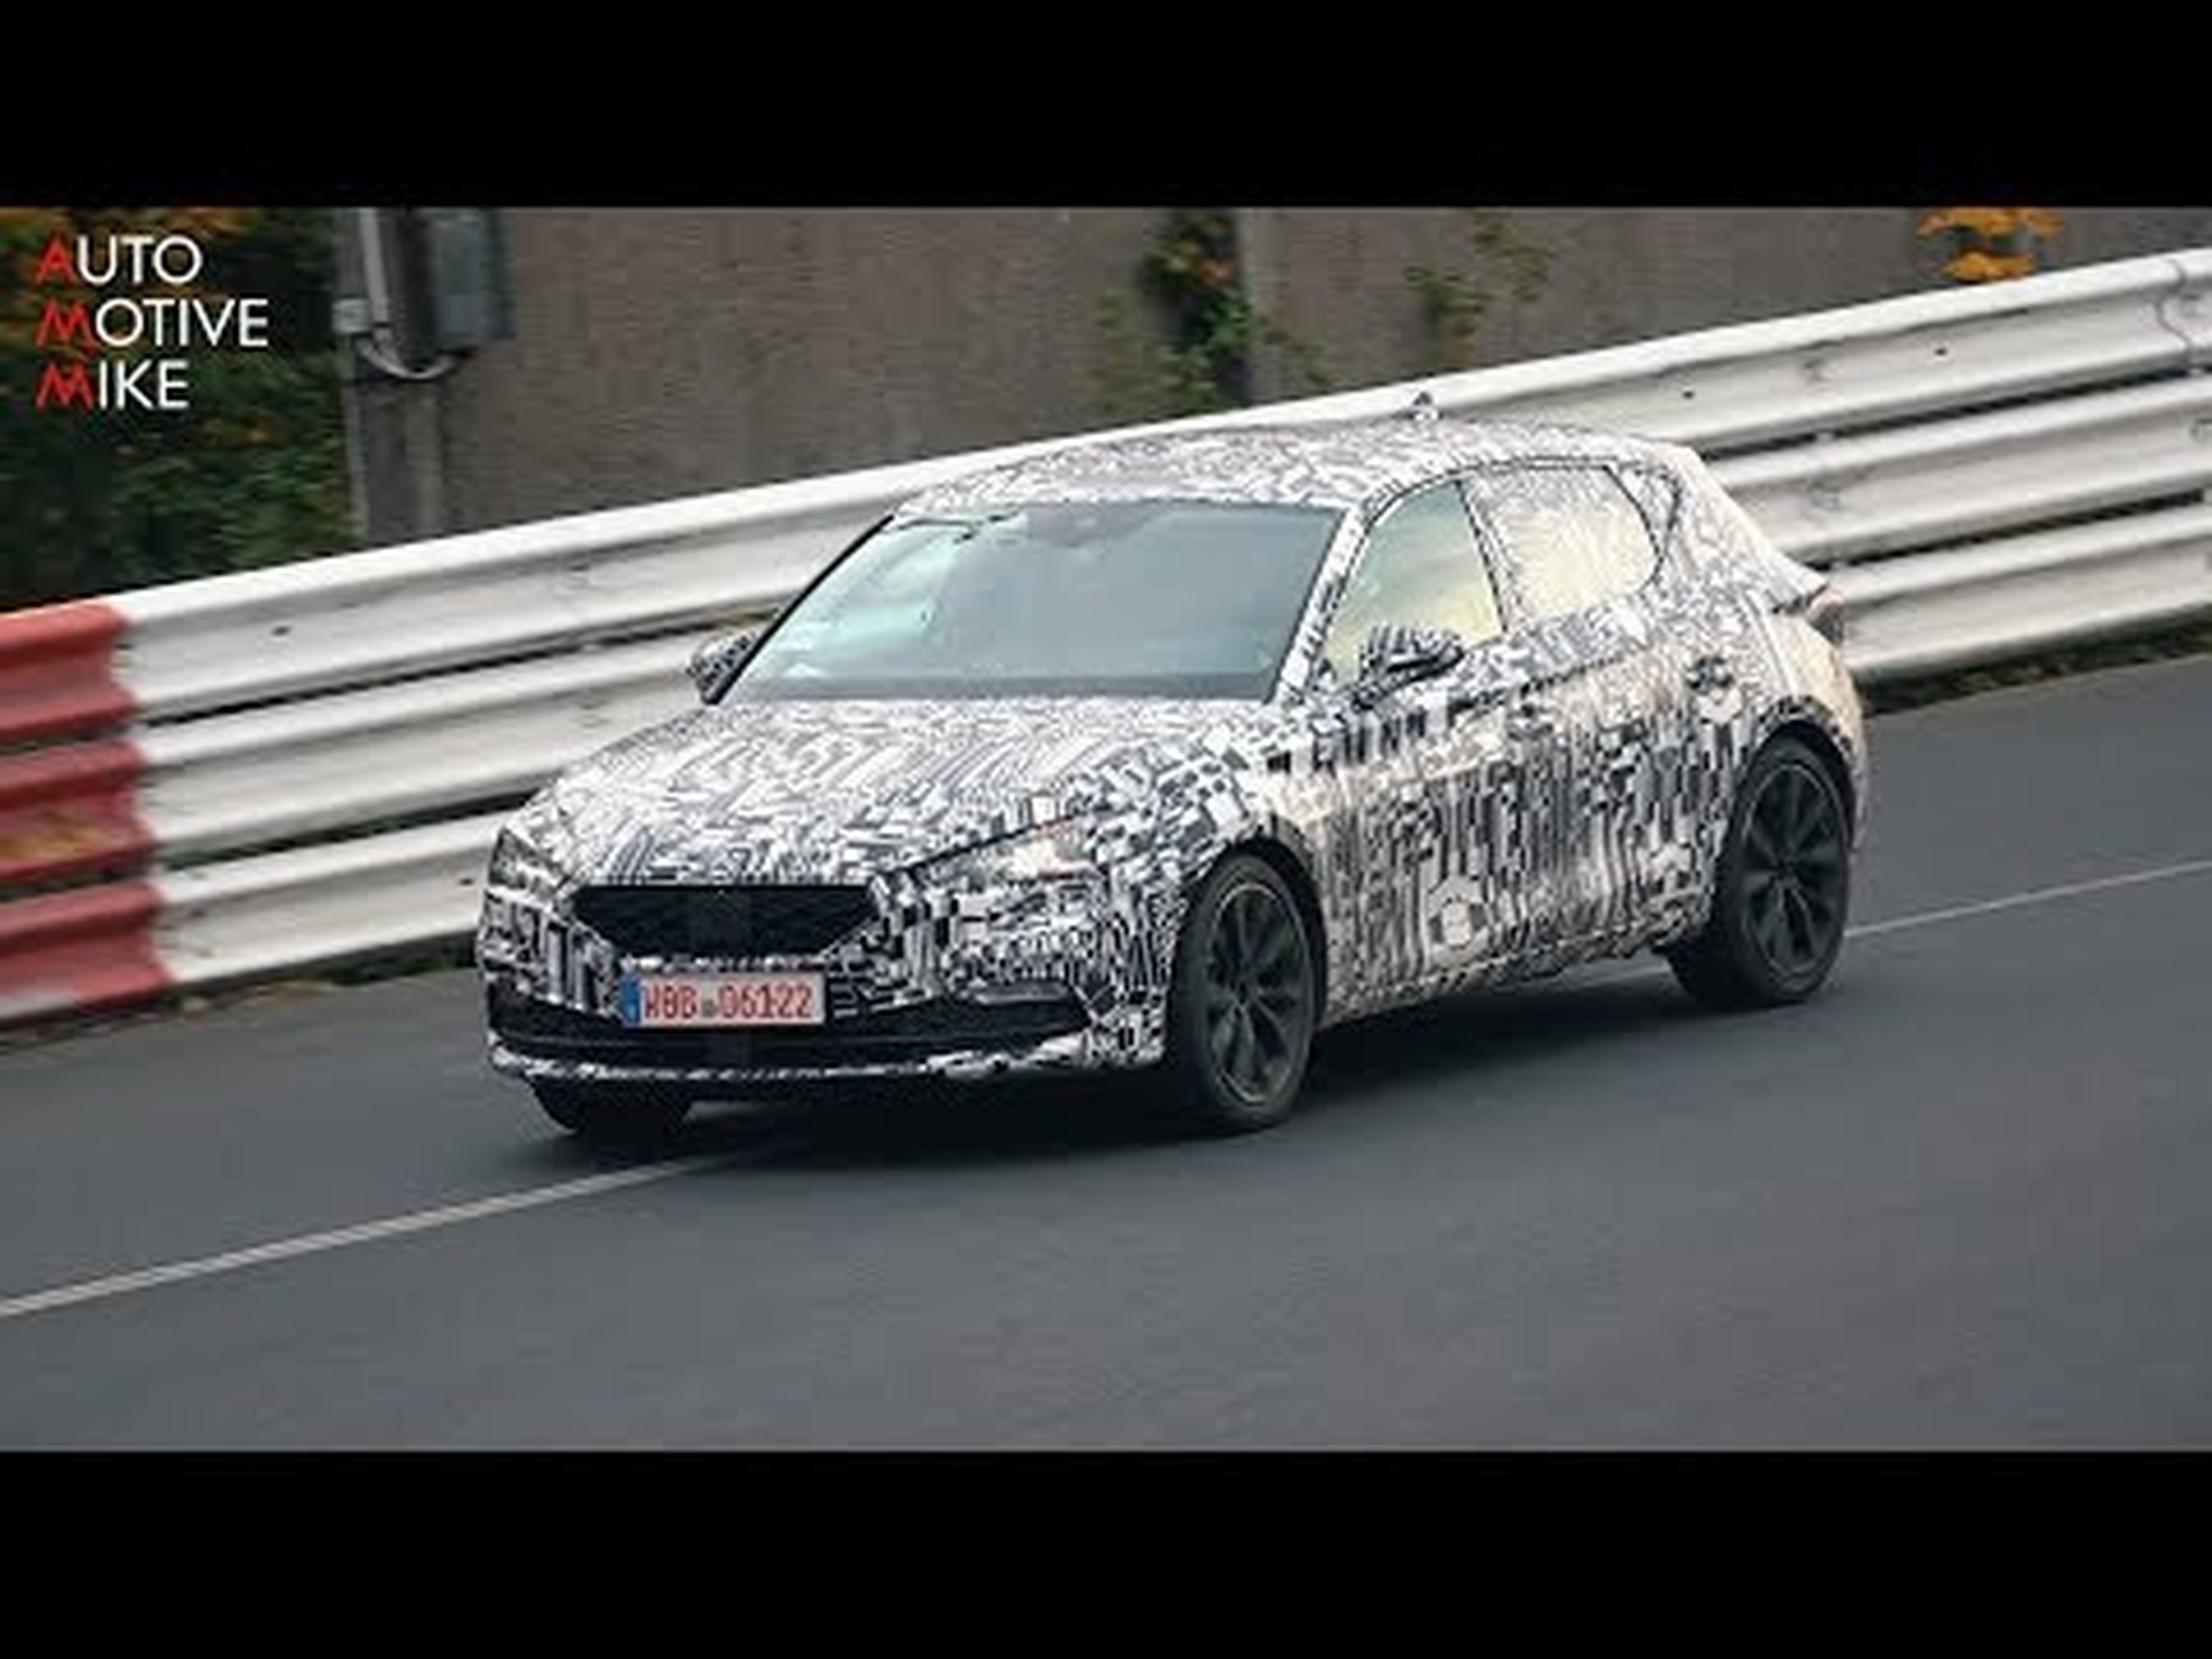 2020 SEAT LEON SPIED TESTING AT THE NÜRBURGRING